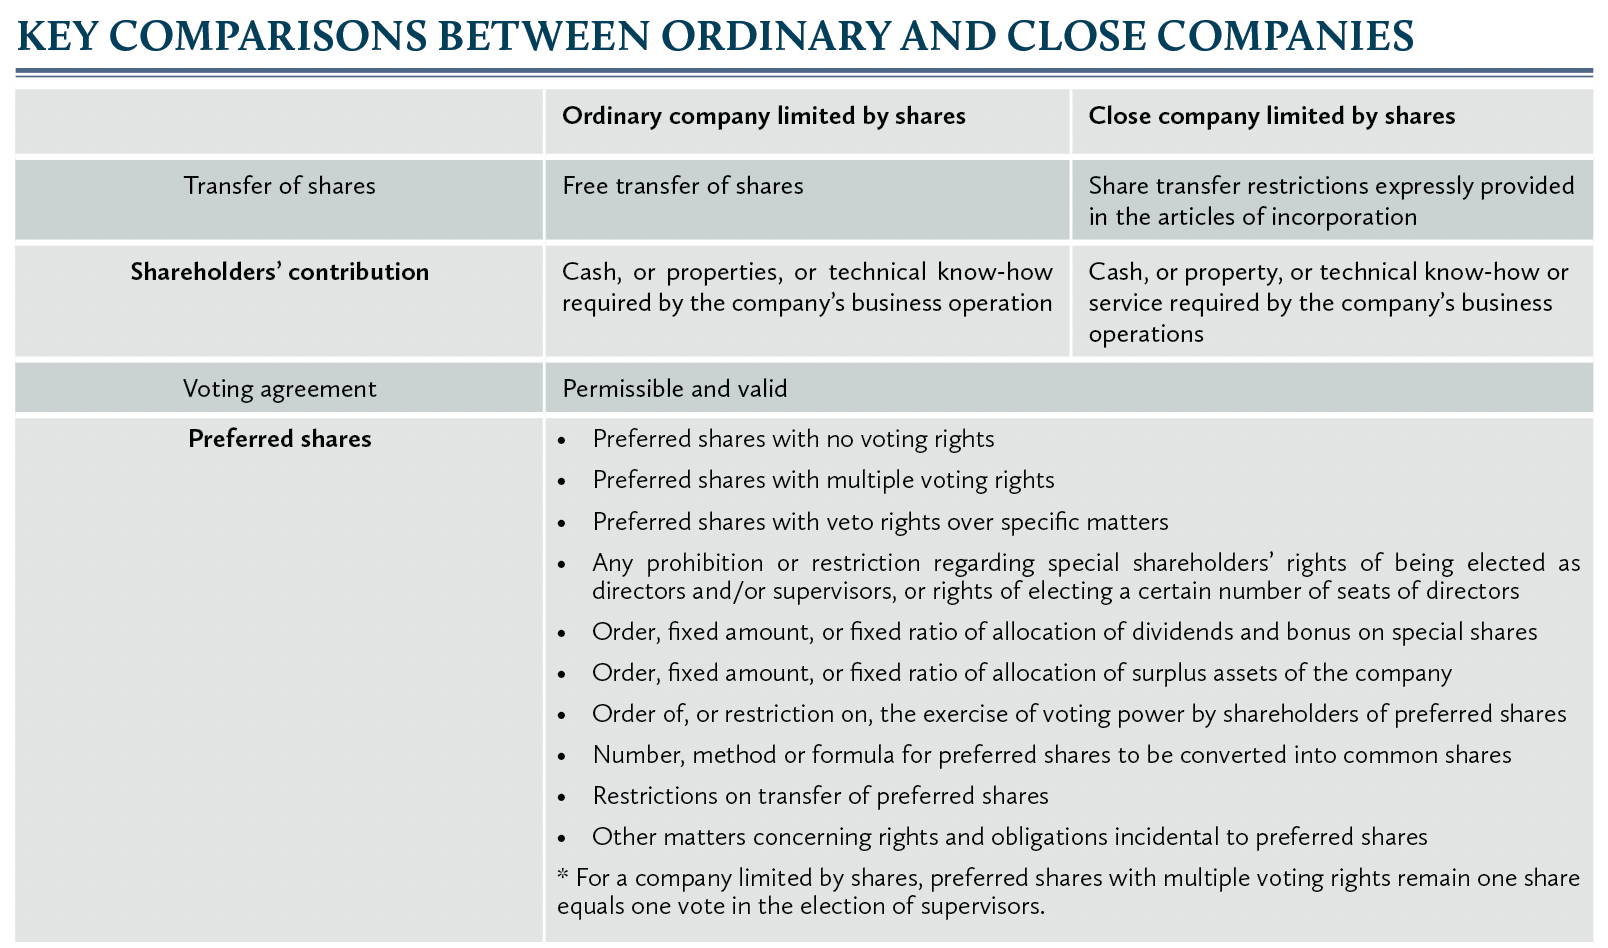 Key comparisons between ordinary and close companies